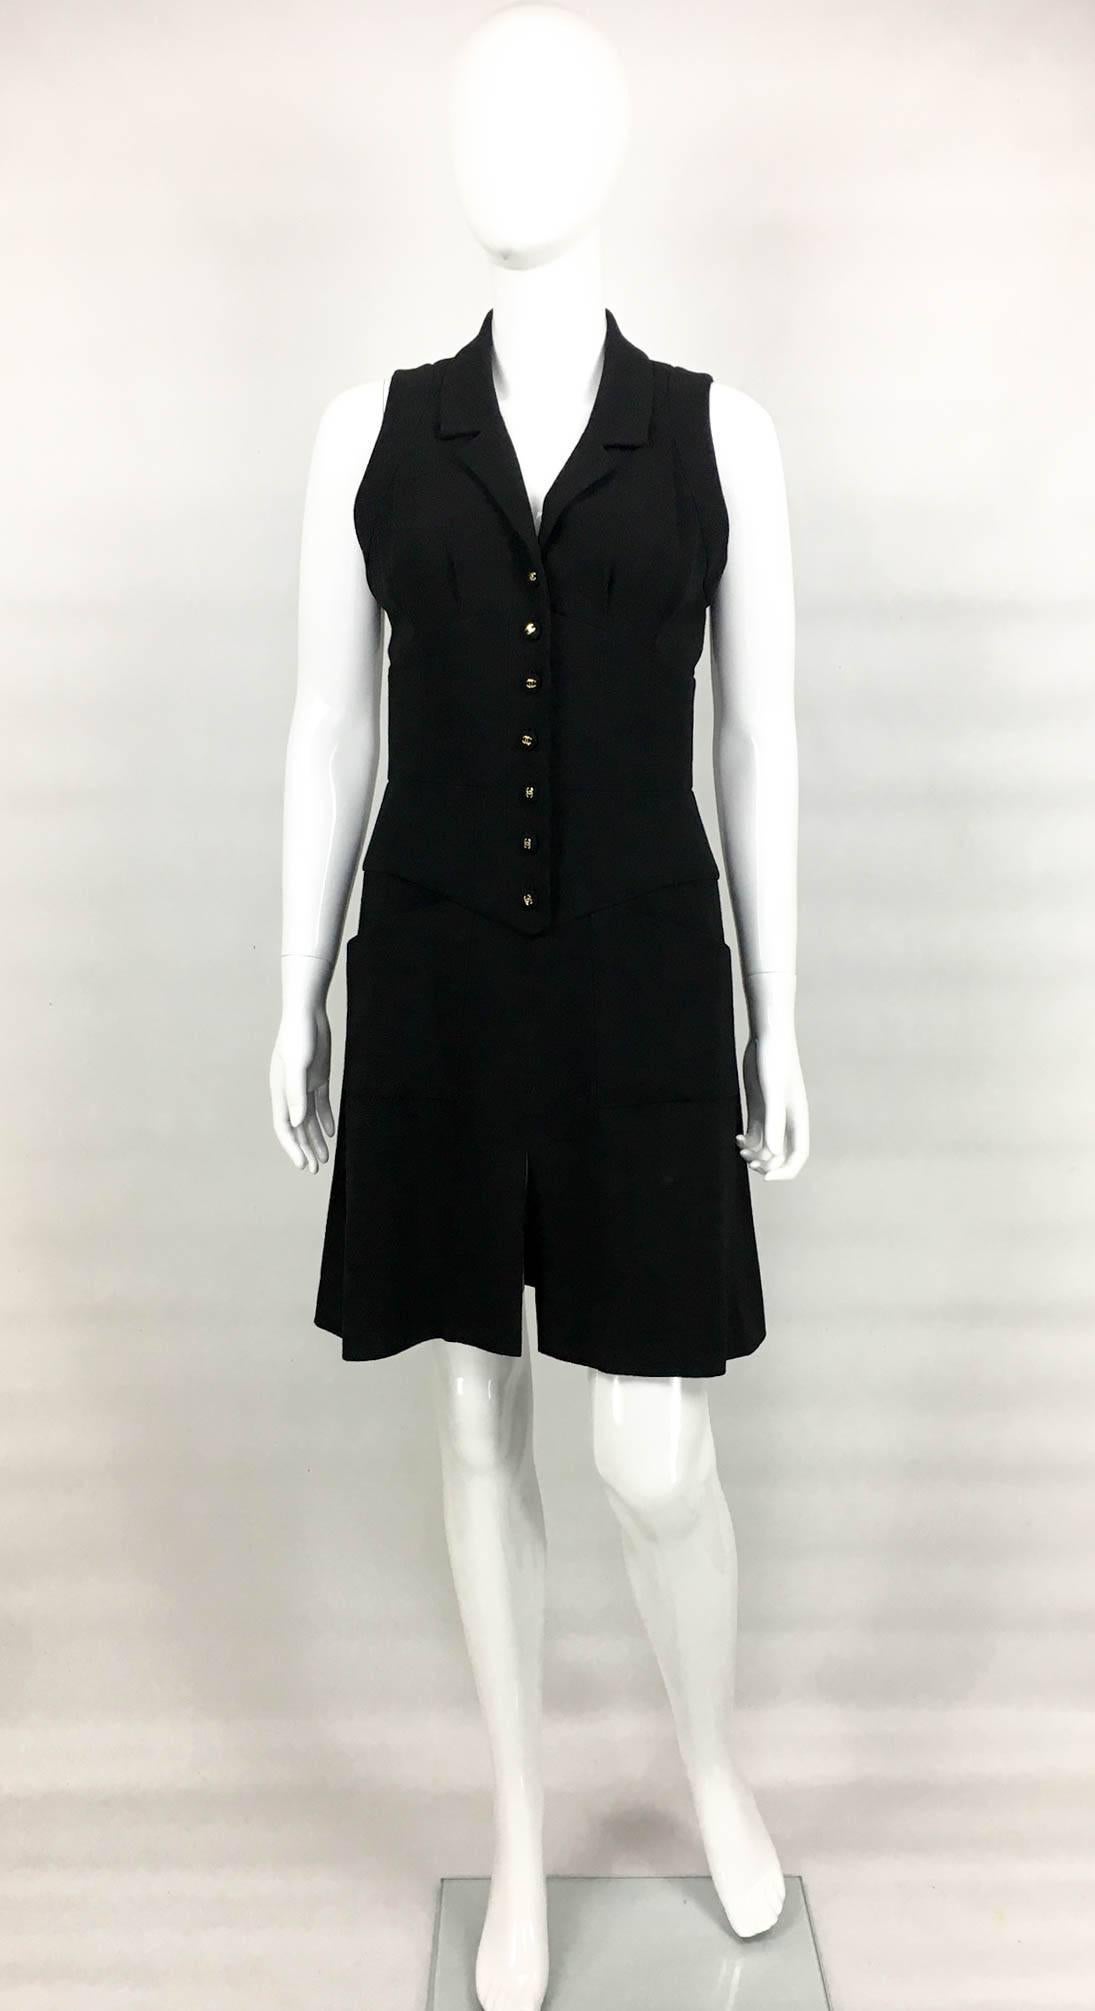 Cool Vintage Chanel Black Wool Dress. This stylish Little Black Dress by Chanel is made in lightweight wool and dates back from the early 1990’s. Sleeveless, the top part of the dress references a waistcoat, whereas the bottom part flares out to a